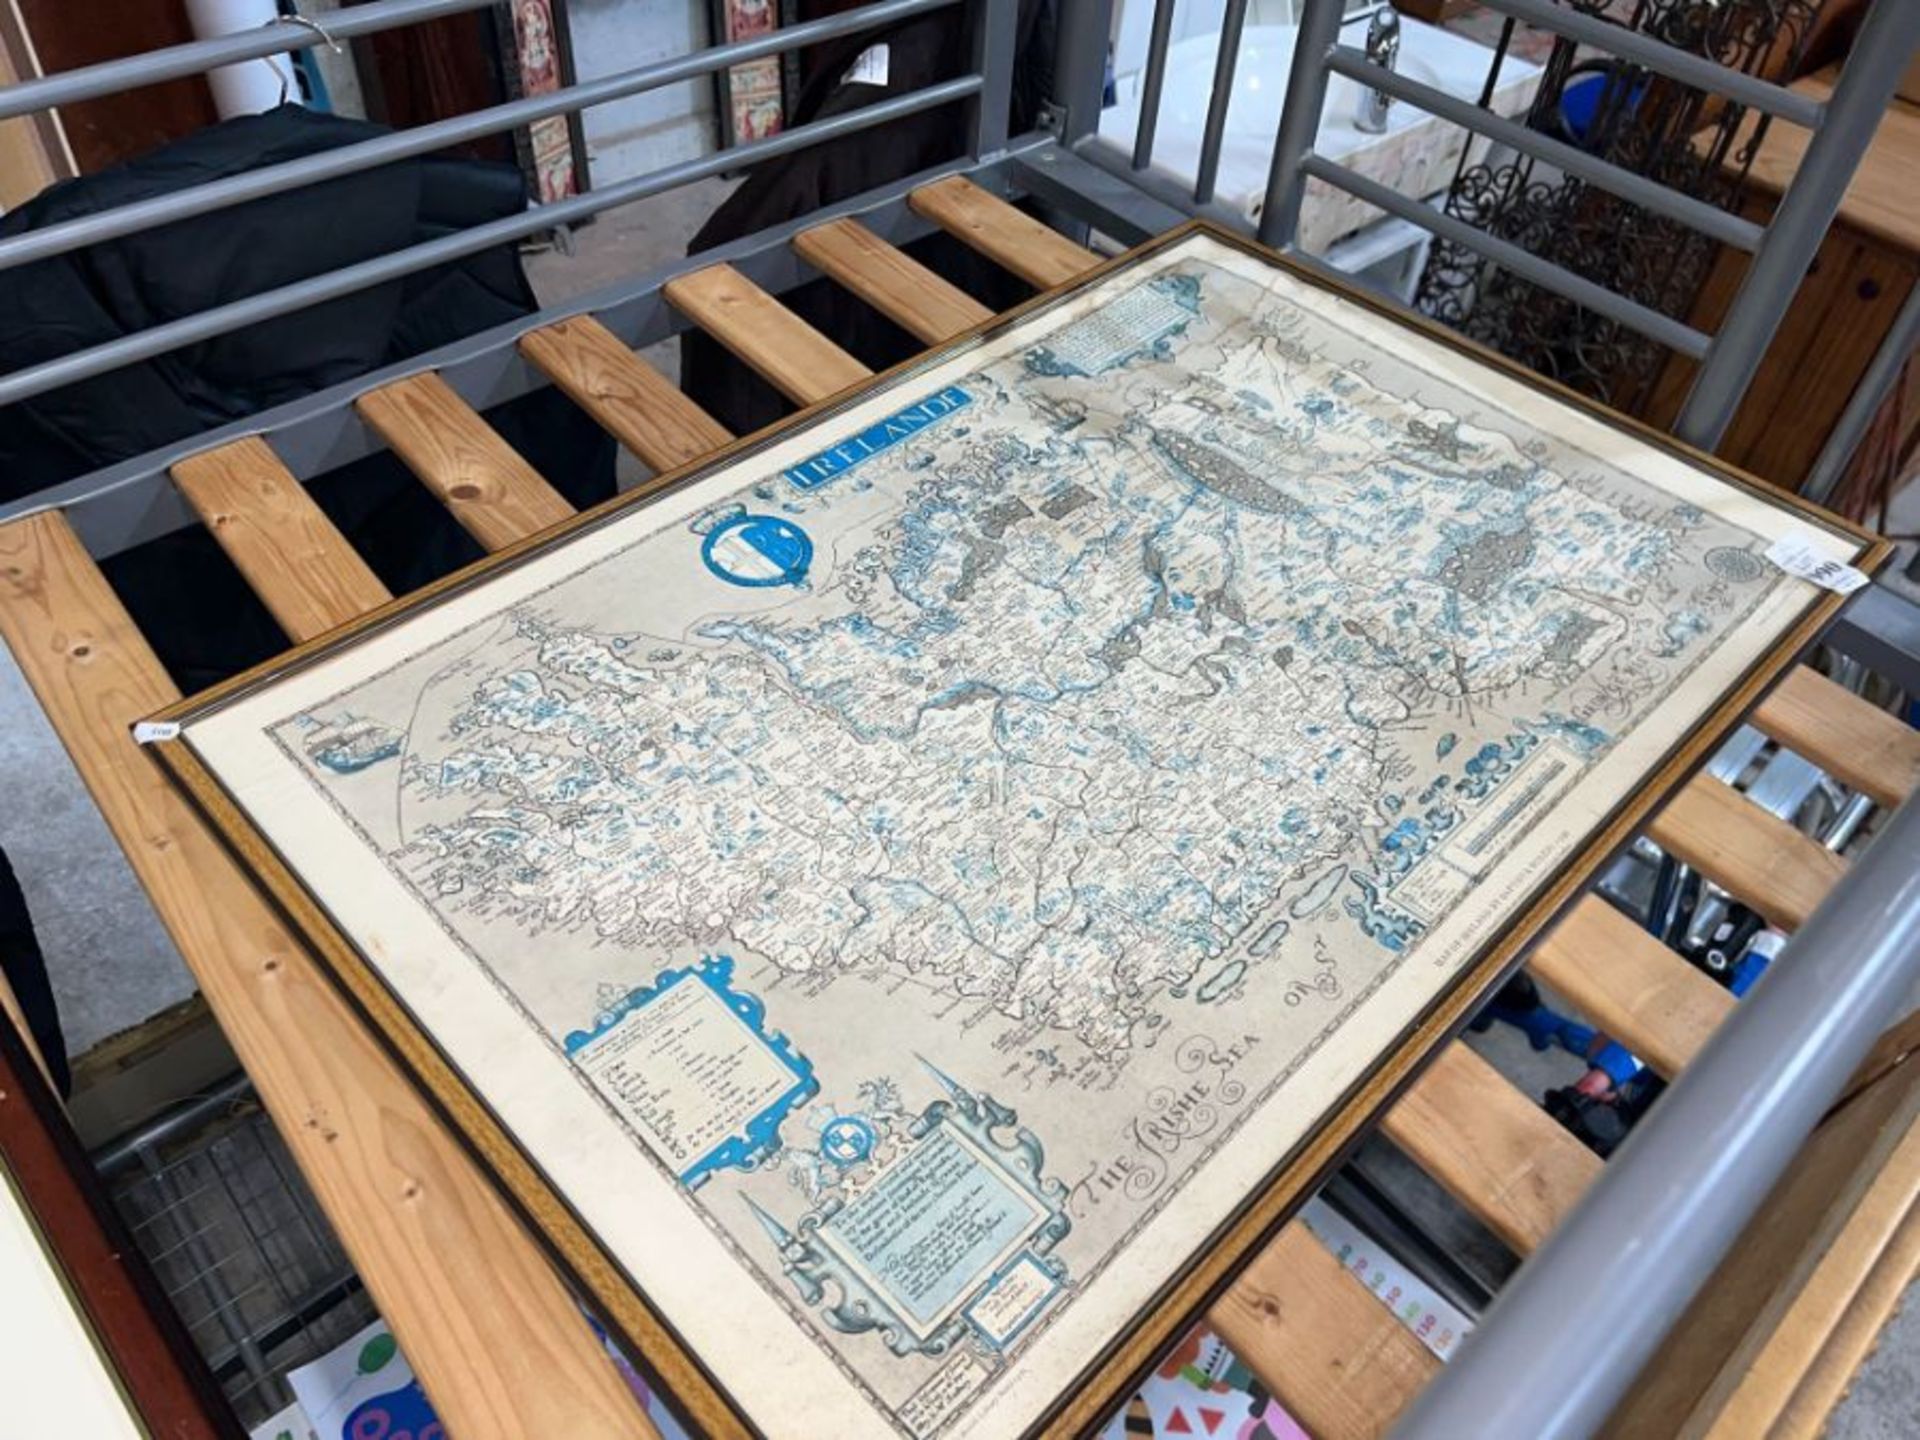 FRAMED PICTURE OF A MAP OF IRELAND